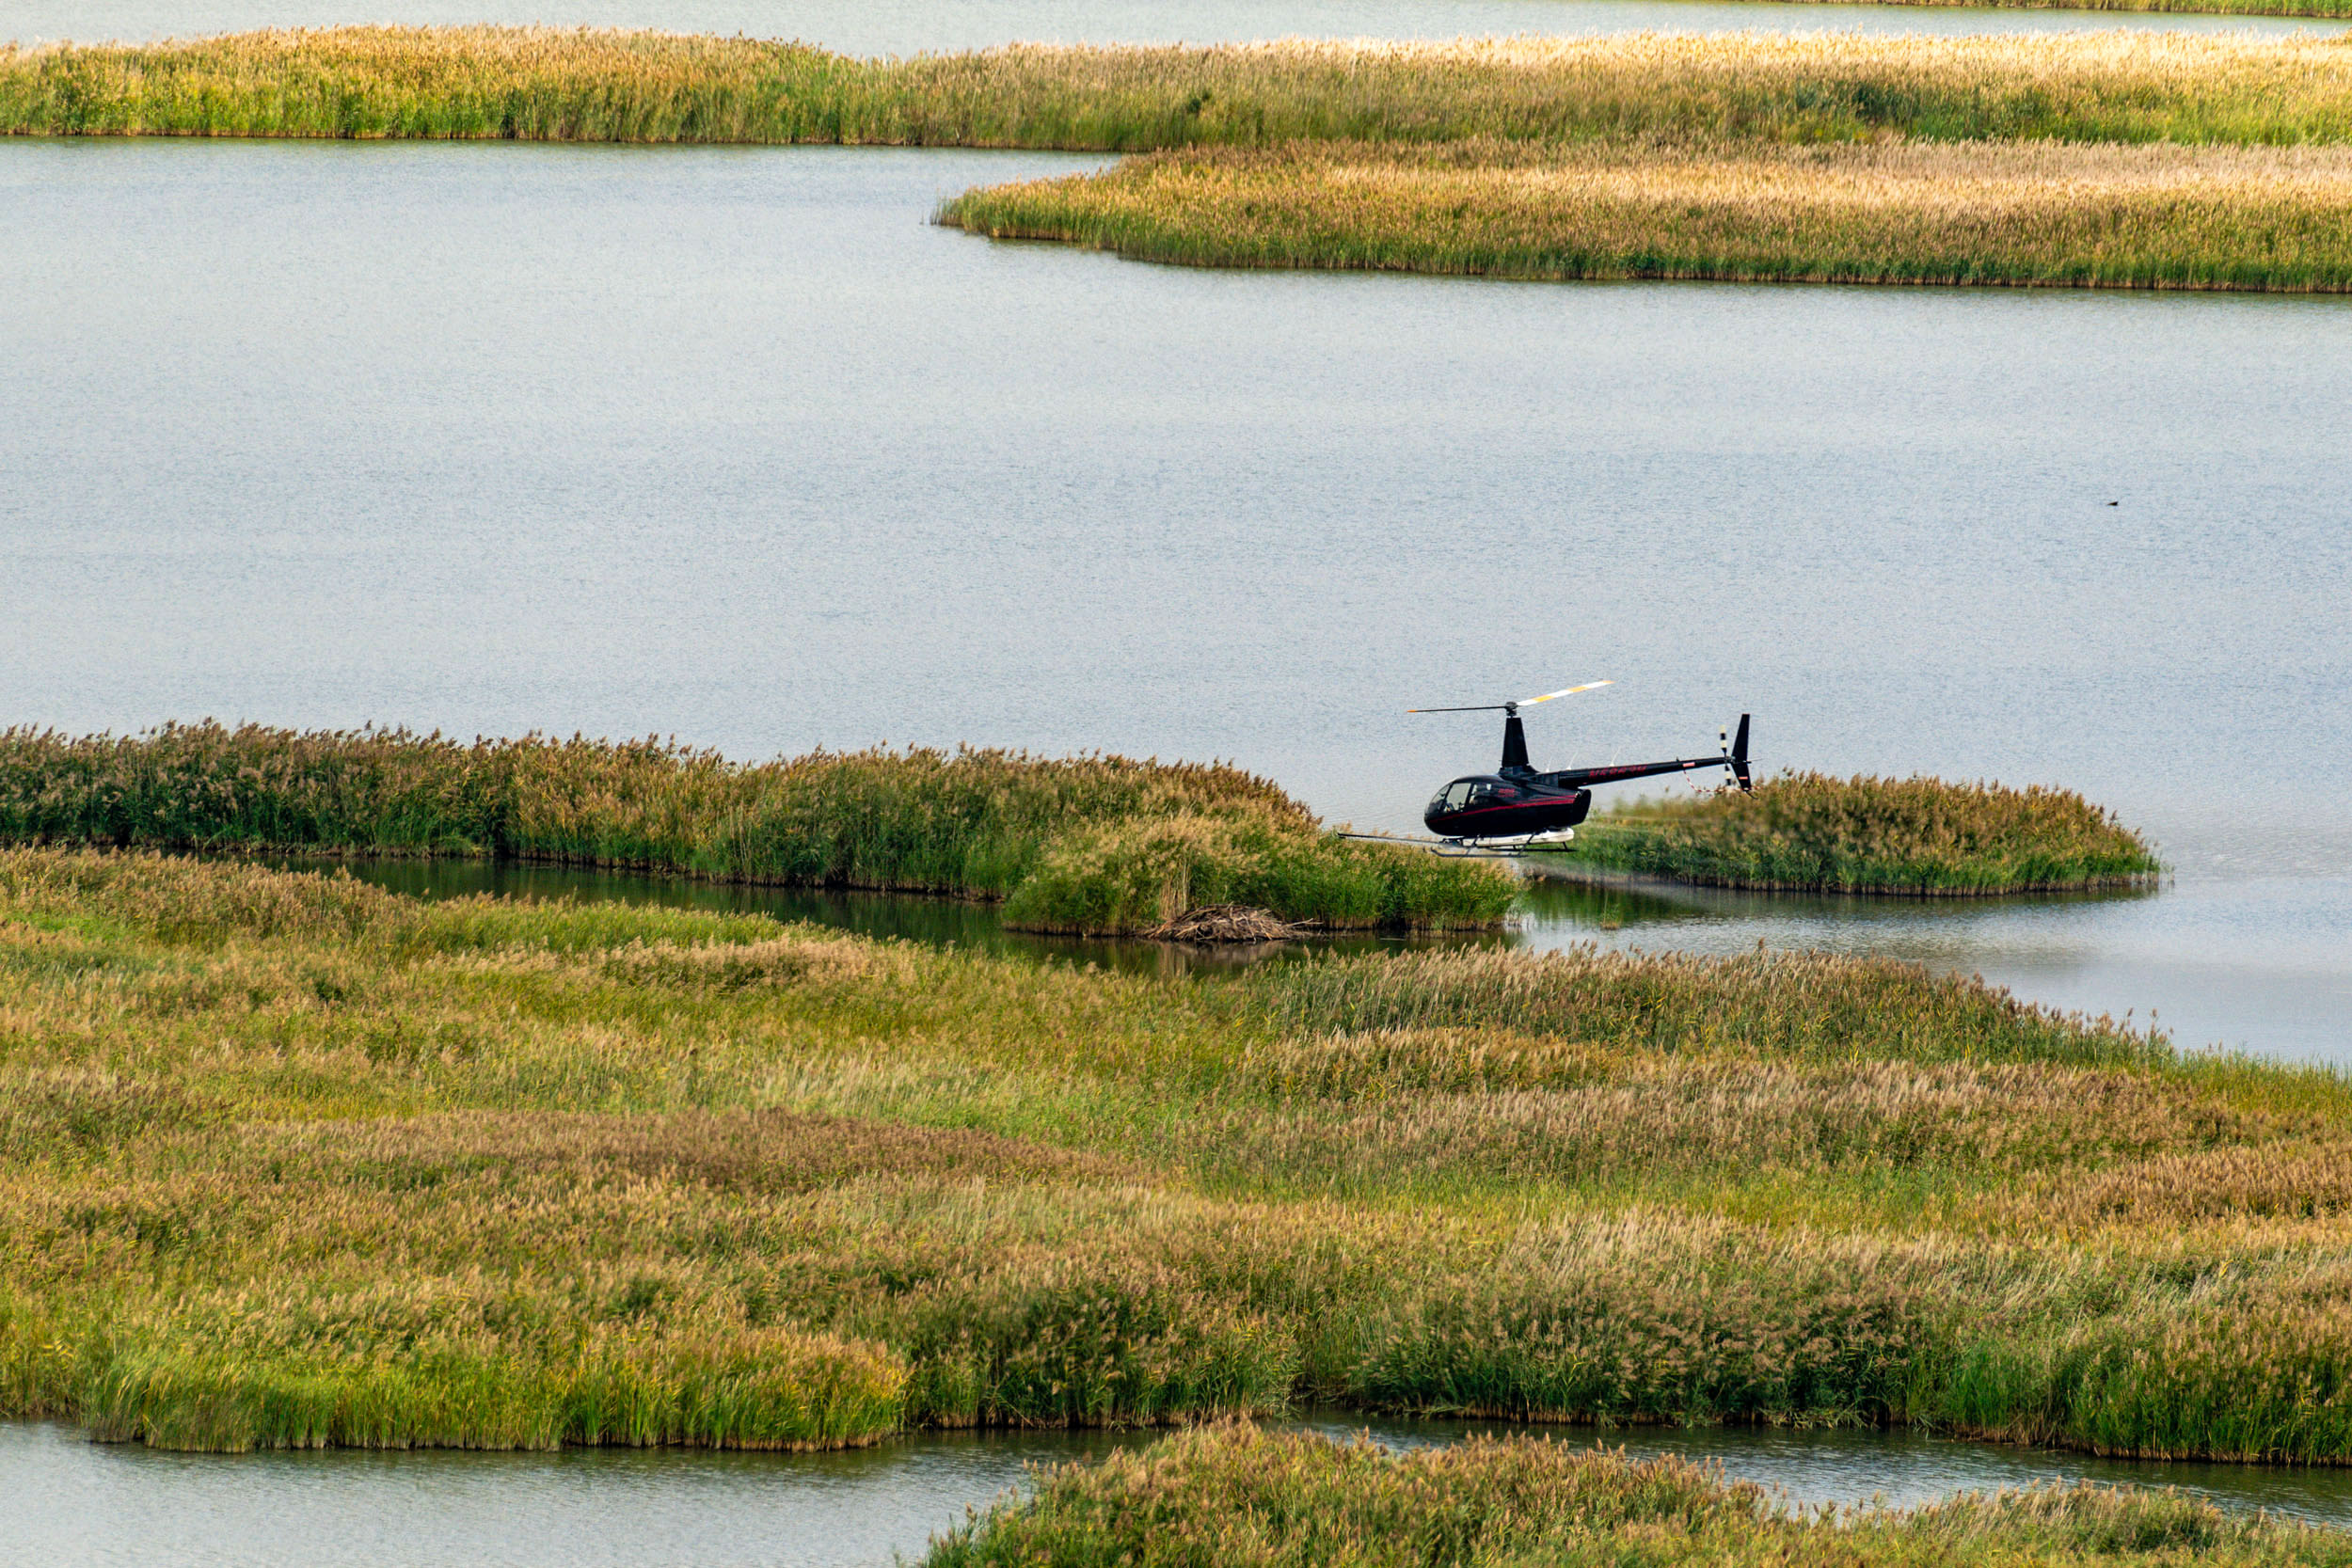 A contractor hired by the Nebraska Game and Parks Commission uses a helicopter to apply herbicide to phragmites, an invasive, noxious weed, at Niobrara Confluence Wildlife Management Area on the Missouri River near the village of Niobrara. Also known as common reed, phragmites is choking out native vegetation, reducing the amount of wildlife habitat available on the Missouri, Platte and other rivers, reservoirs and wetlands throughout the state. It is also an Aquatic Invasive Species. (Photo by Eric Fowler, for NEBRASKAland Magazine, Nebraska Game and Parks Commission.)